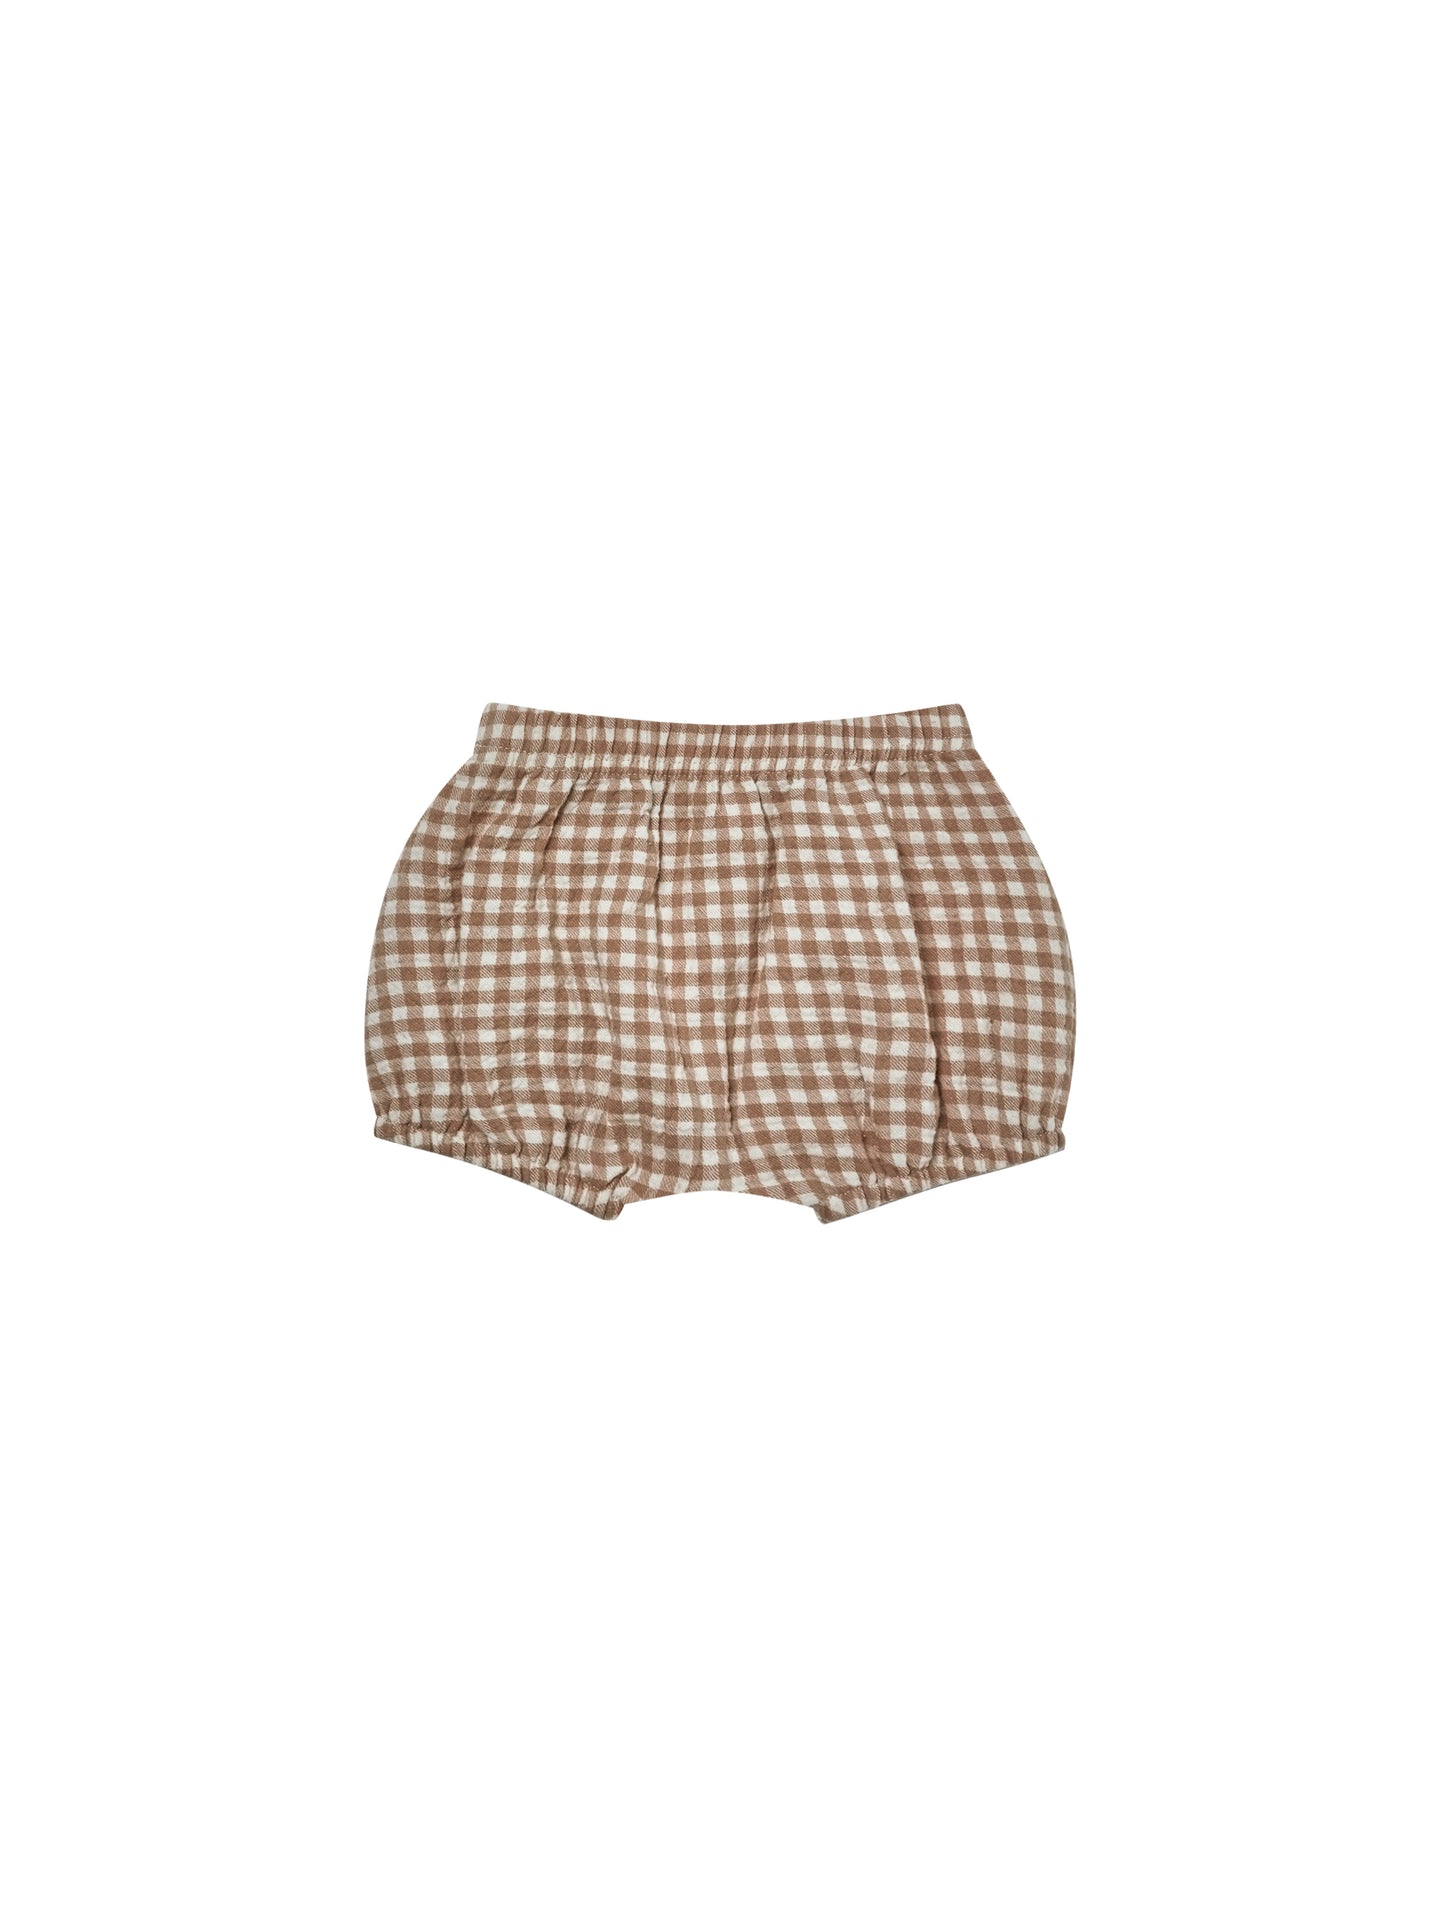 Cocoa Gingham Woven Bloomer